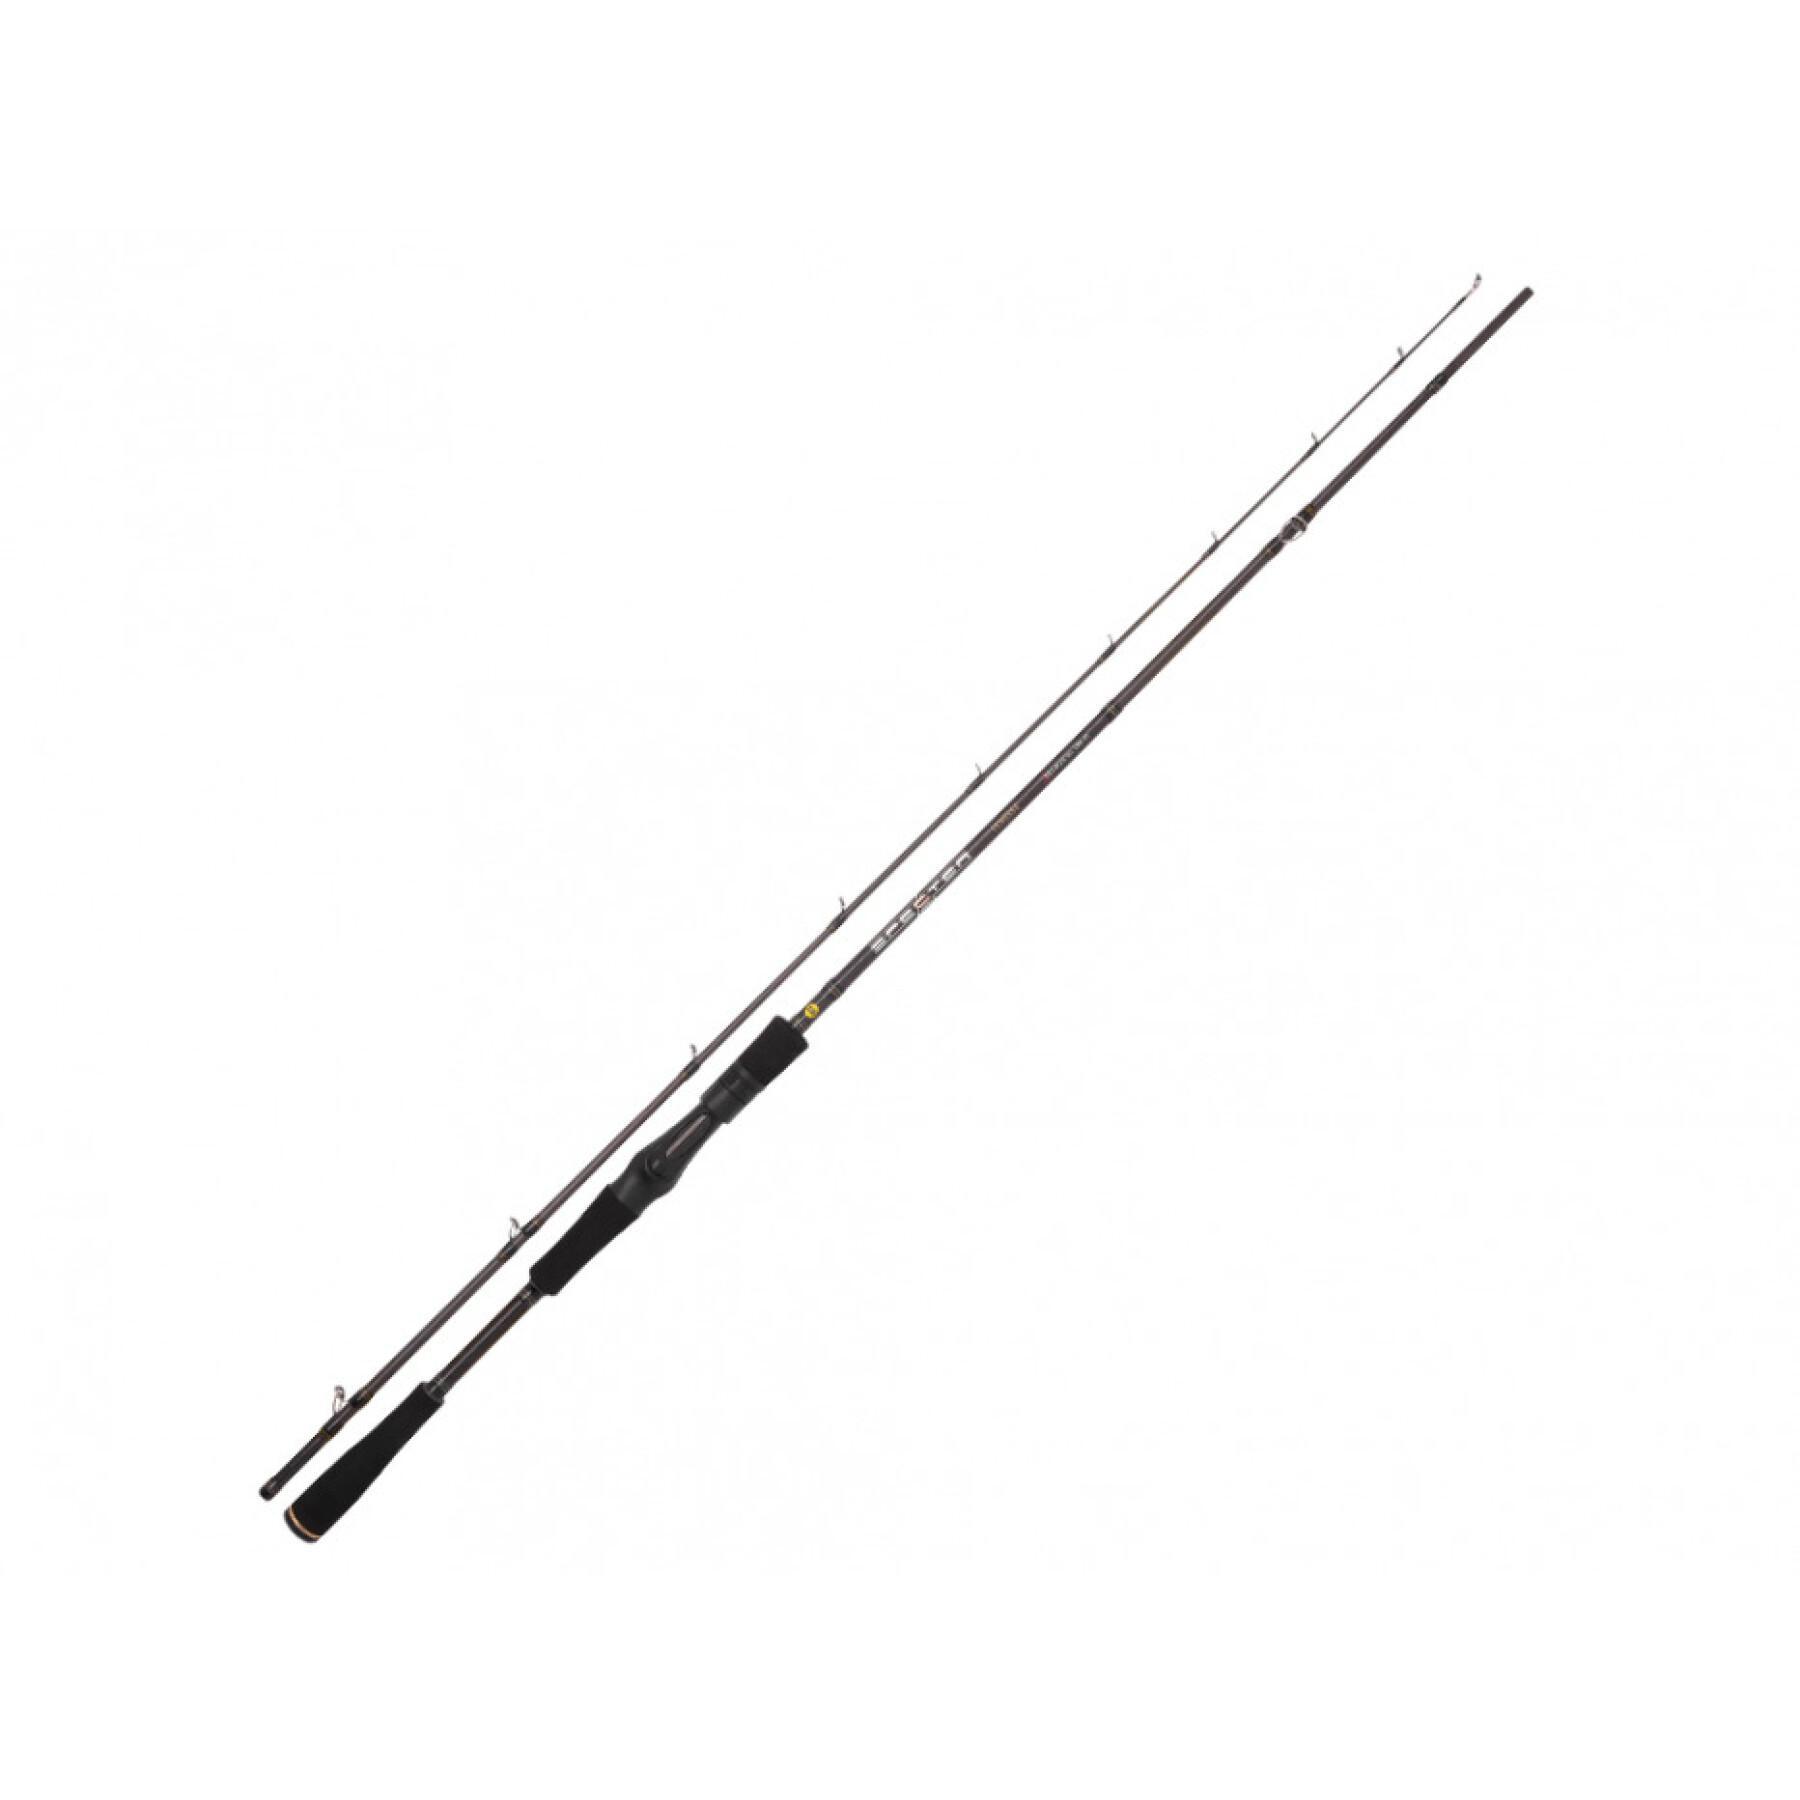 Cana casting Spro Specter Finesse Pelagical H - 2,00 m